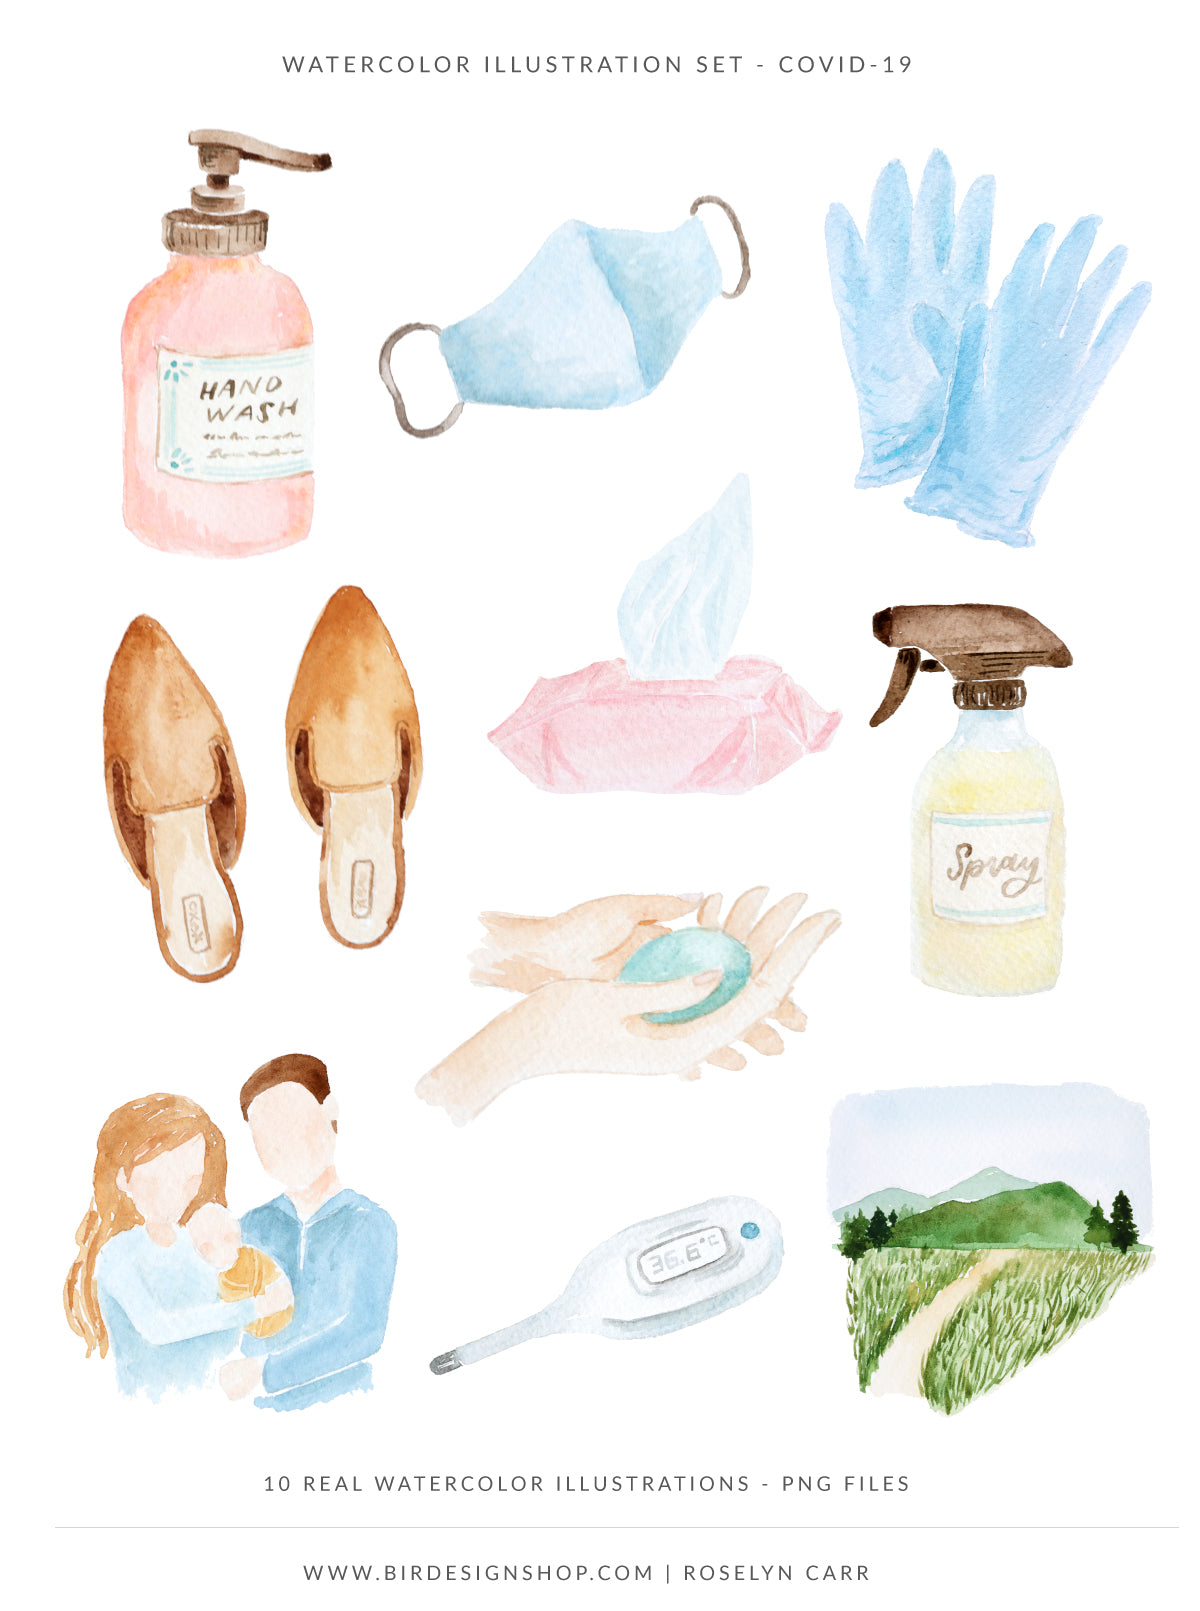 Covid-19 Safety Guidelines Watercolor Illustrations